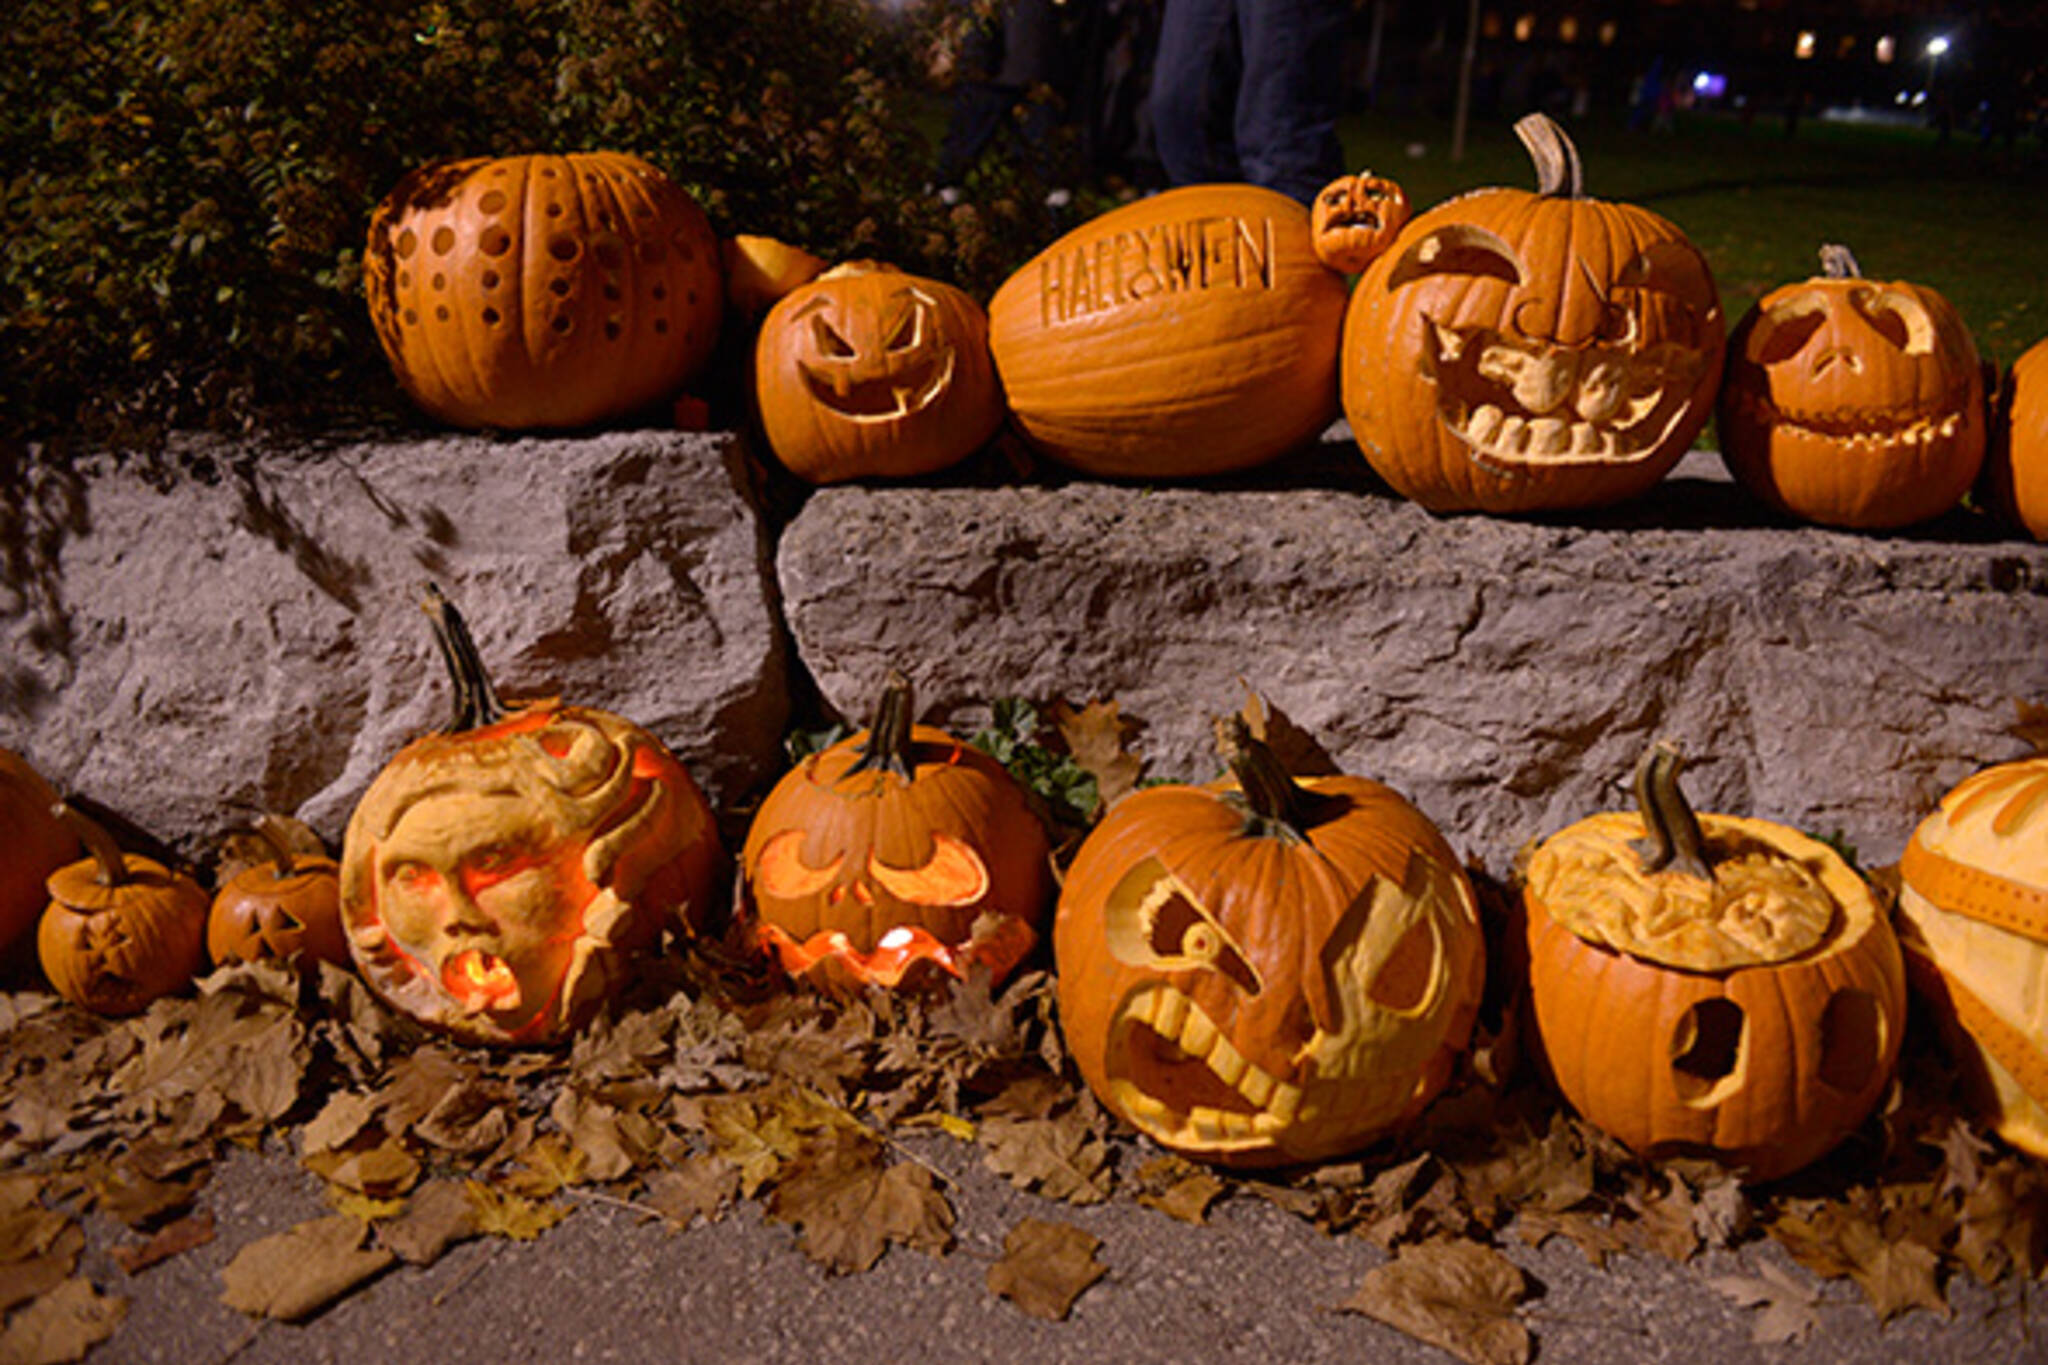 Here's every pumpkin parade in Toronto for 2016